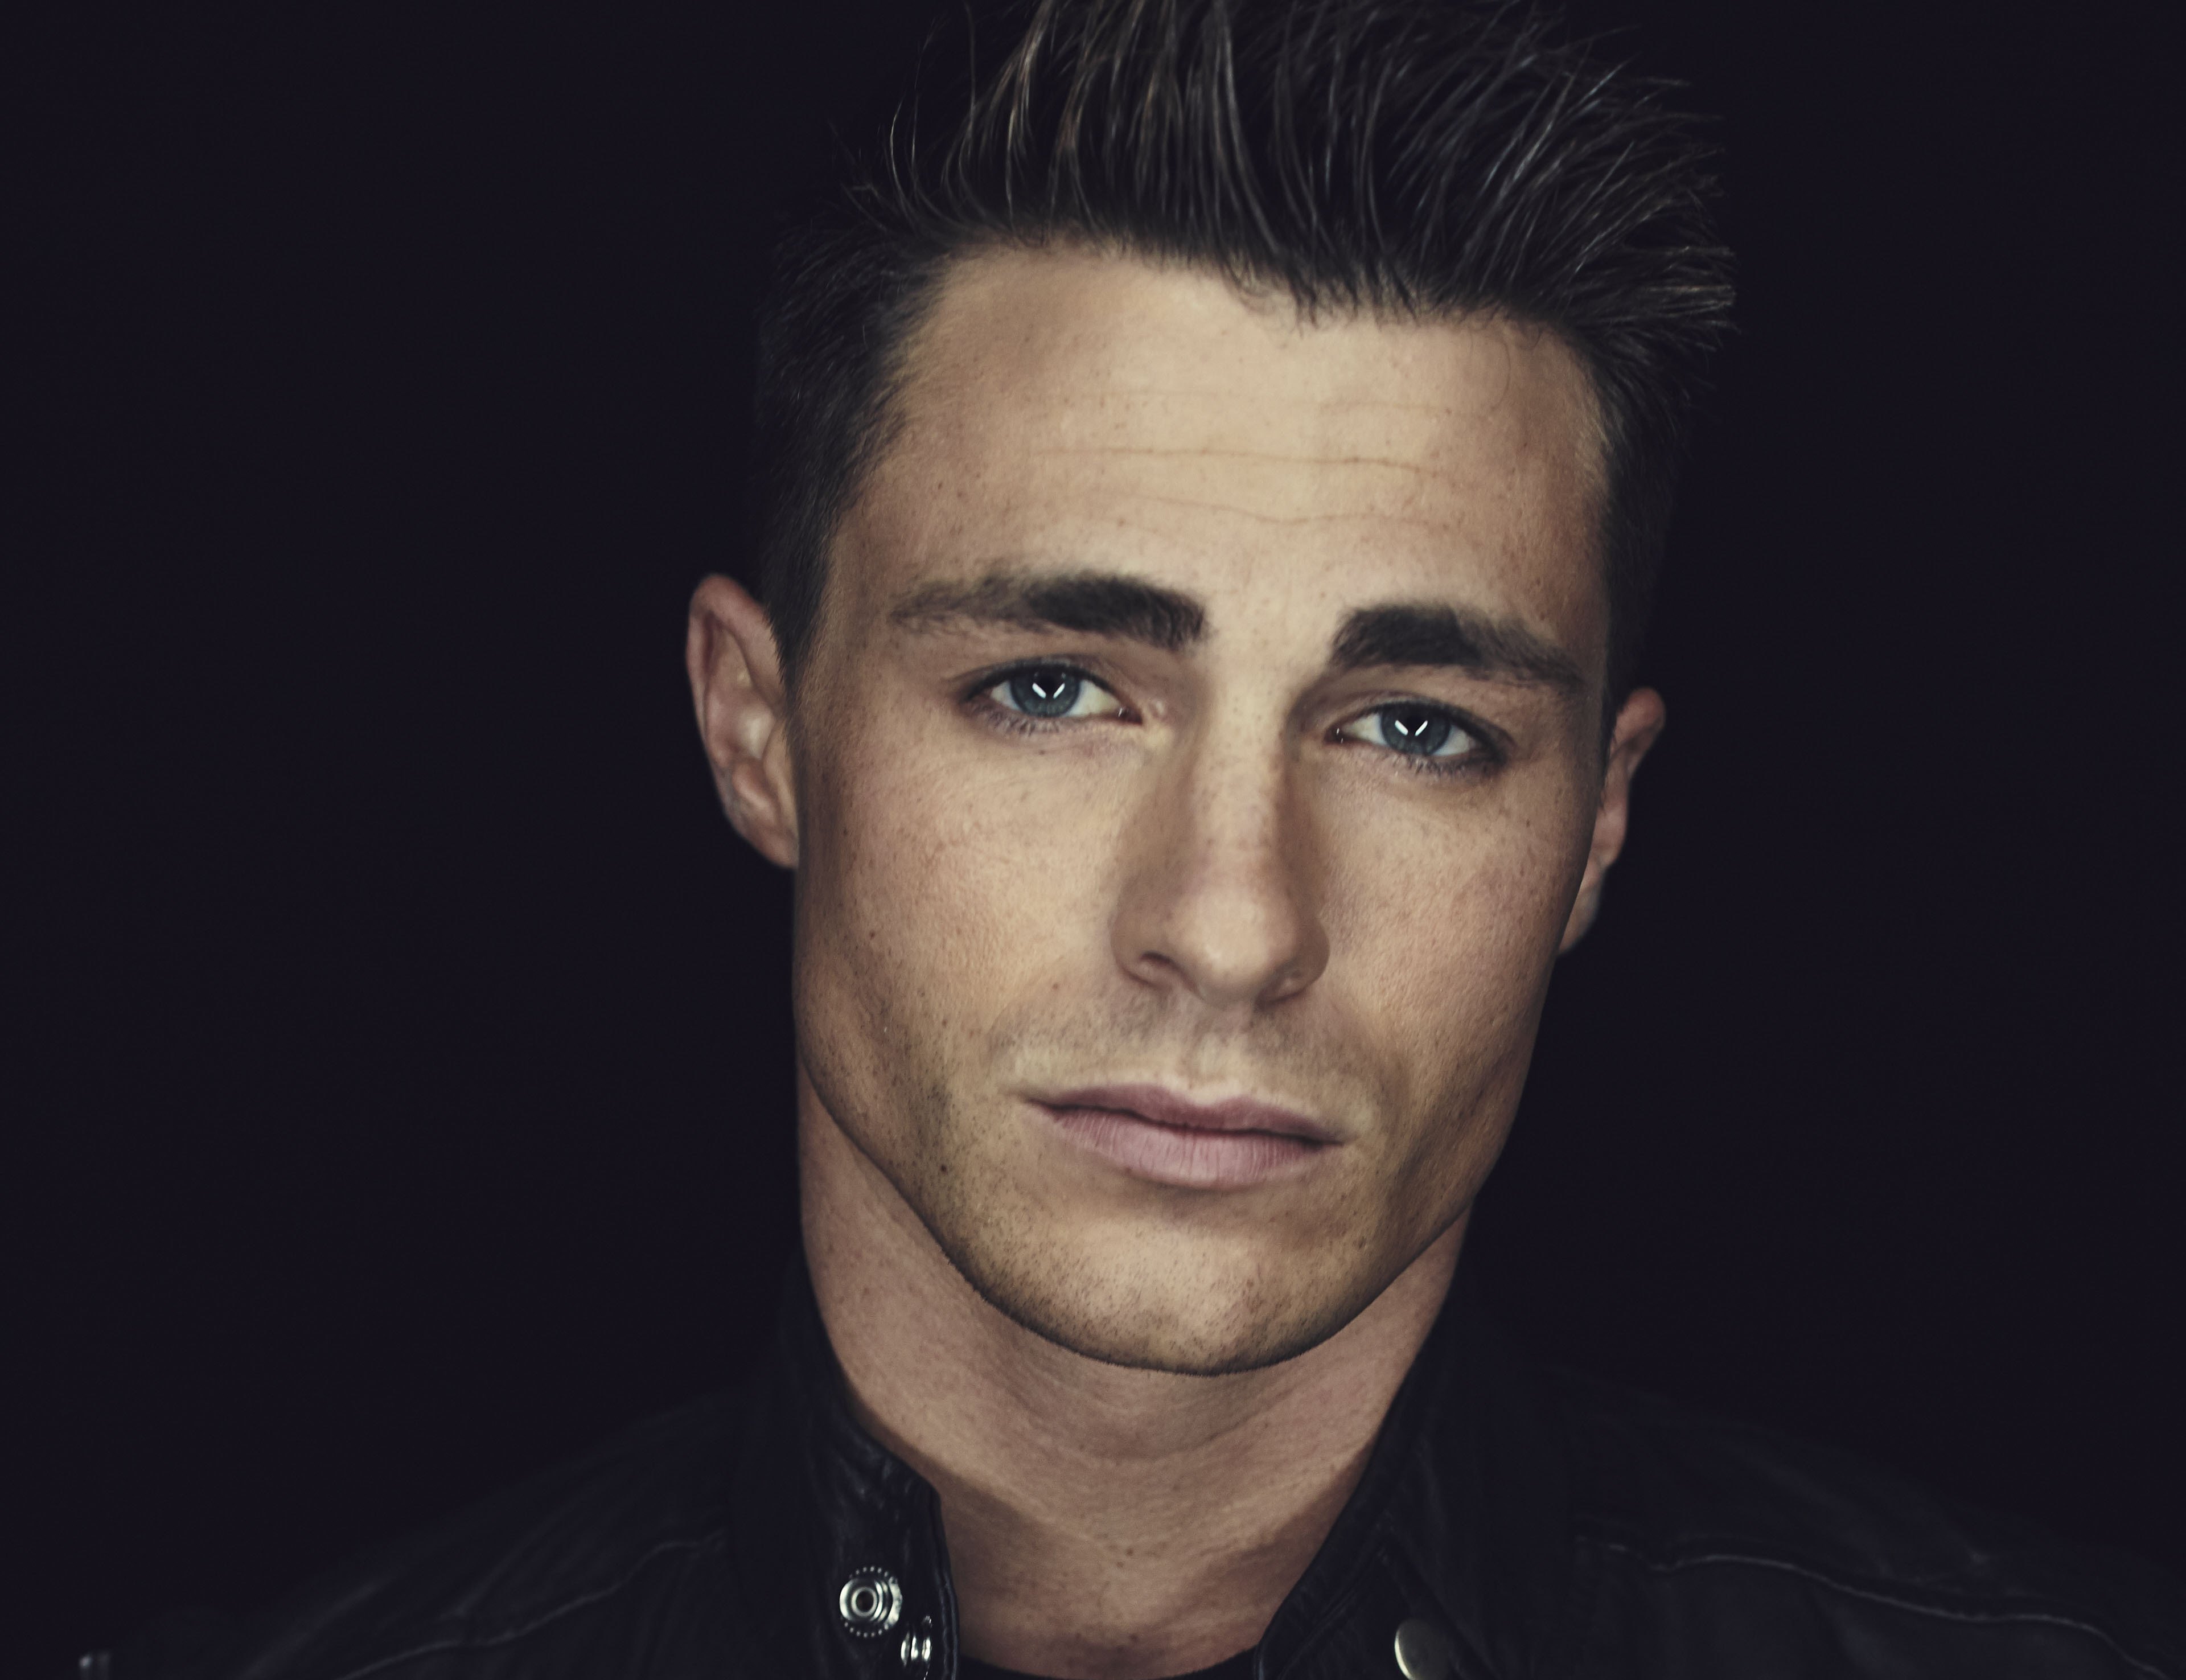 Colton Haynes Hd Wallpapers 7wallpapers Net Images, Photos, Reviews